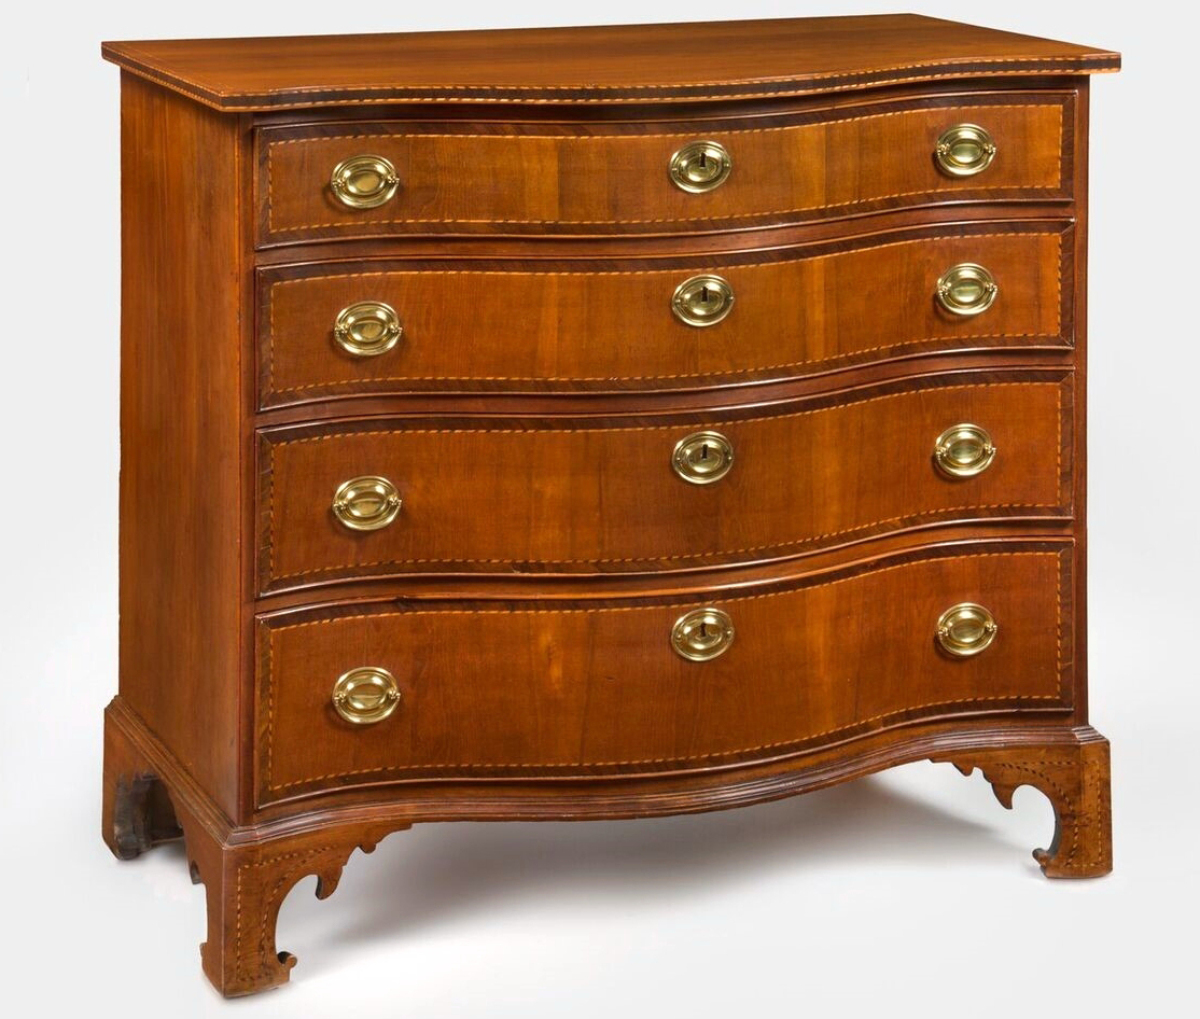 Serpentine chest of drawers by Nathan Lumbard. Inscribed “Made by Nathan Lumbard Apl 20th 1800.” Cherry, cherry and mahogany veneers, light and dark wood inlays, white pine; height 37 by width 41-  by depth 21¾ inches. Private collection.   				                 —Gavin Ashworth photo